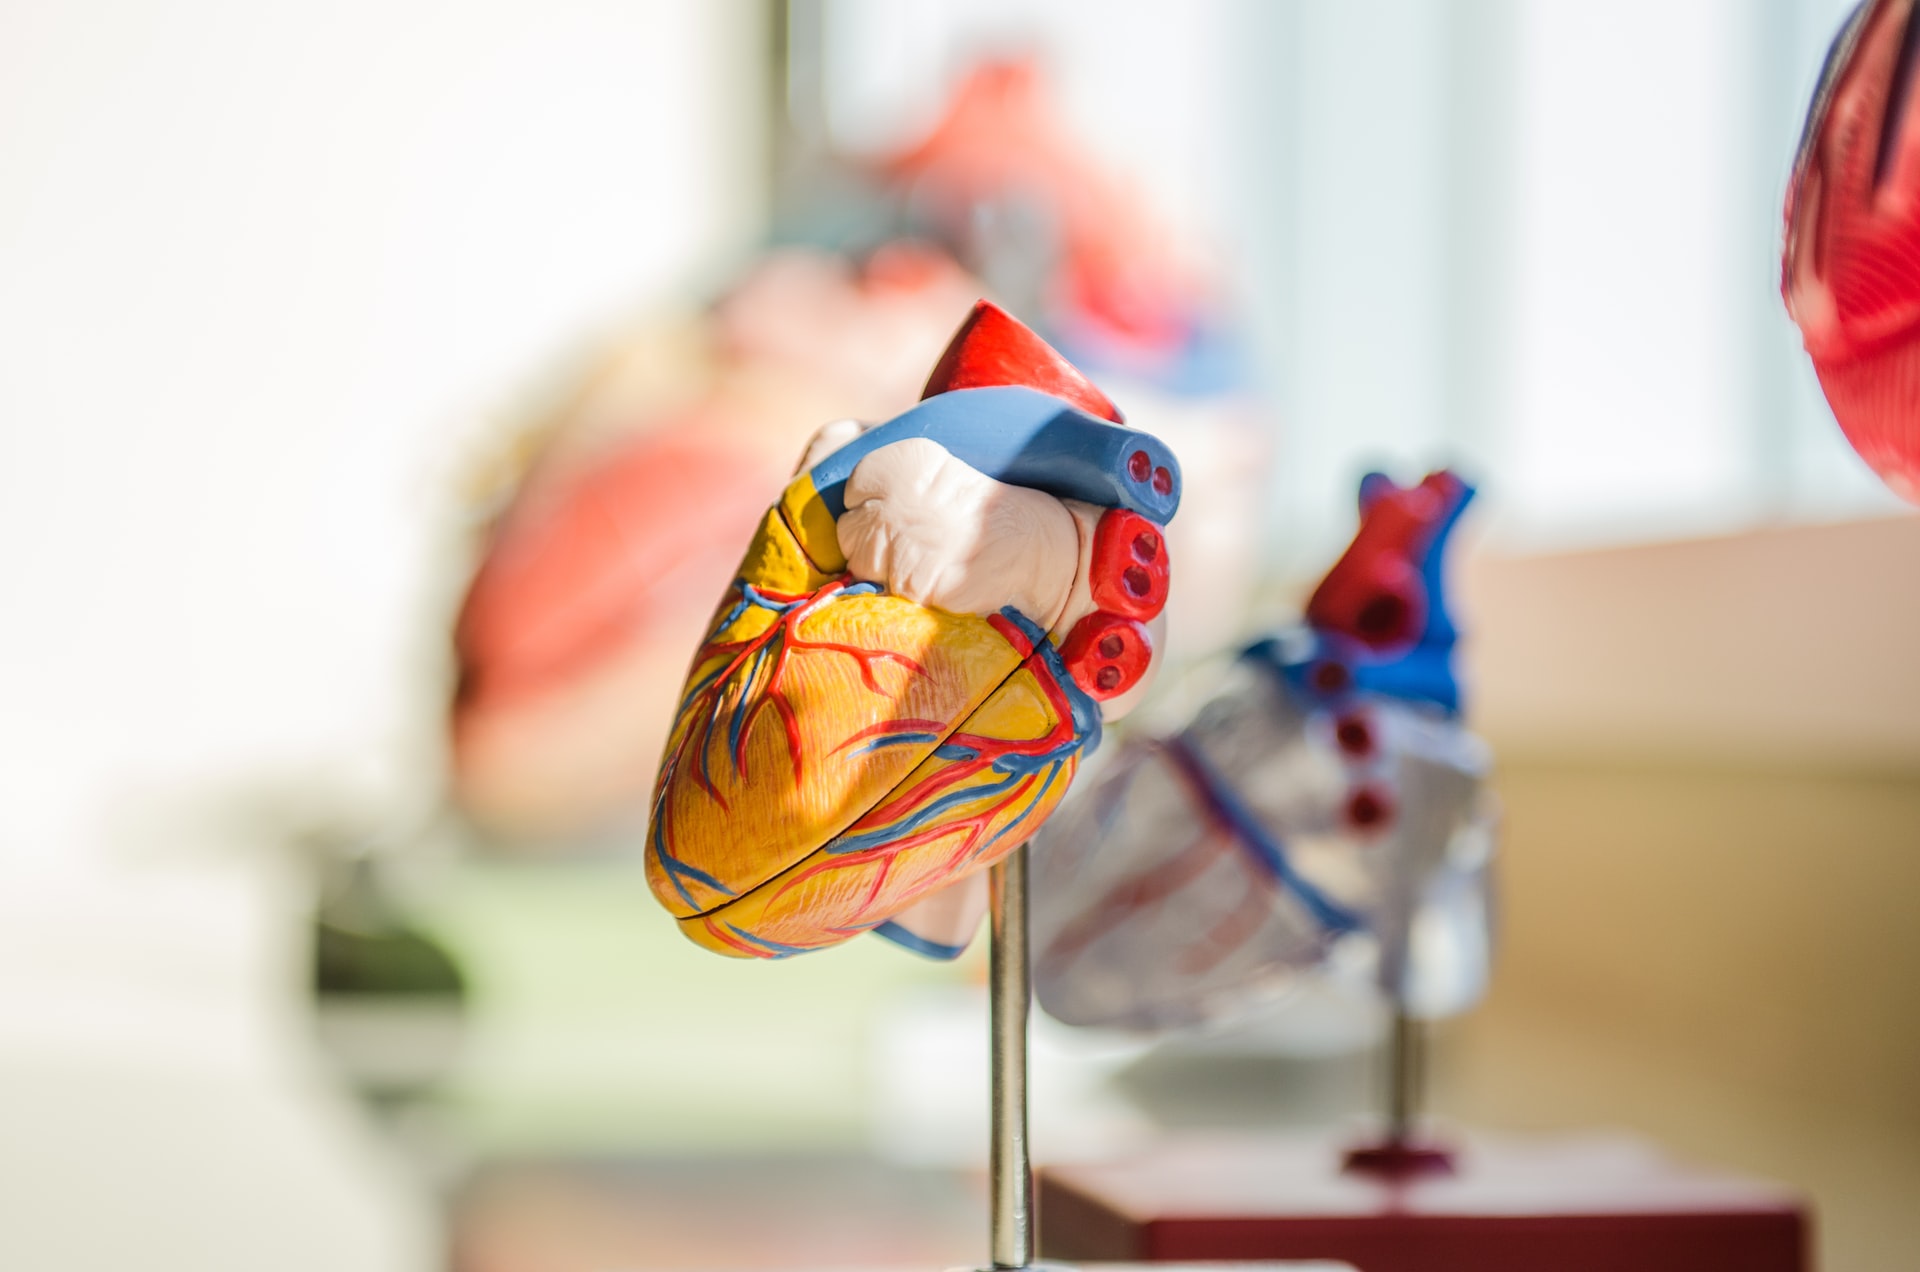 Tongxin Medical nabs Series D investment from Sequoia Capital China to treat heart disease